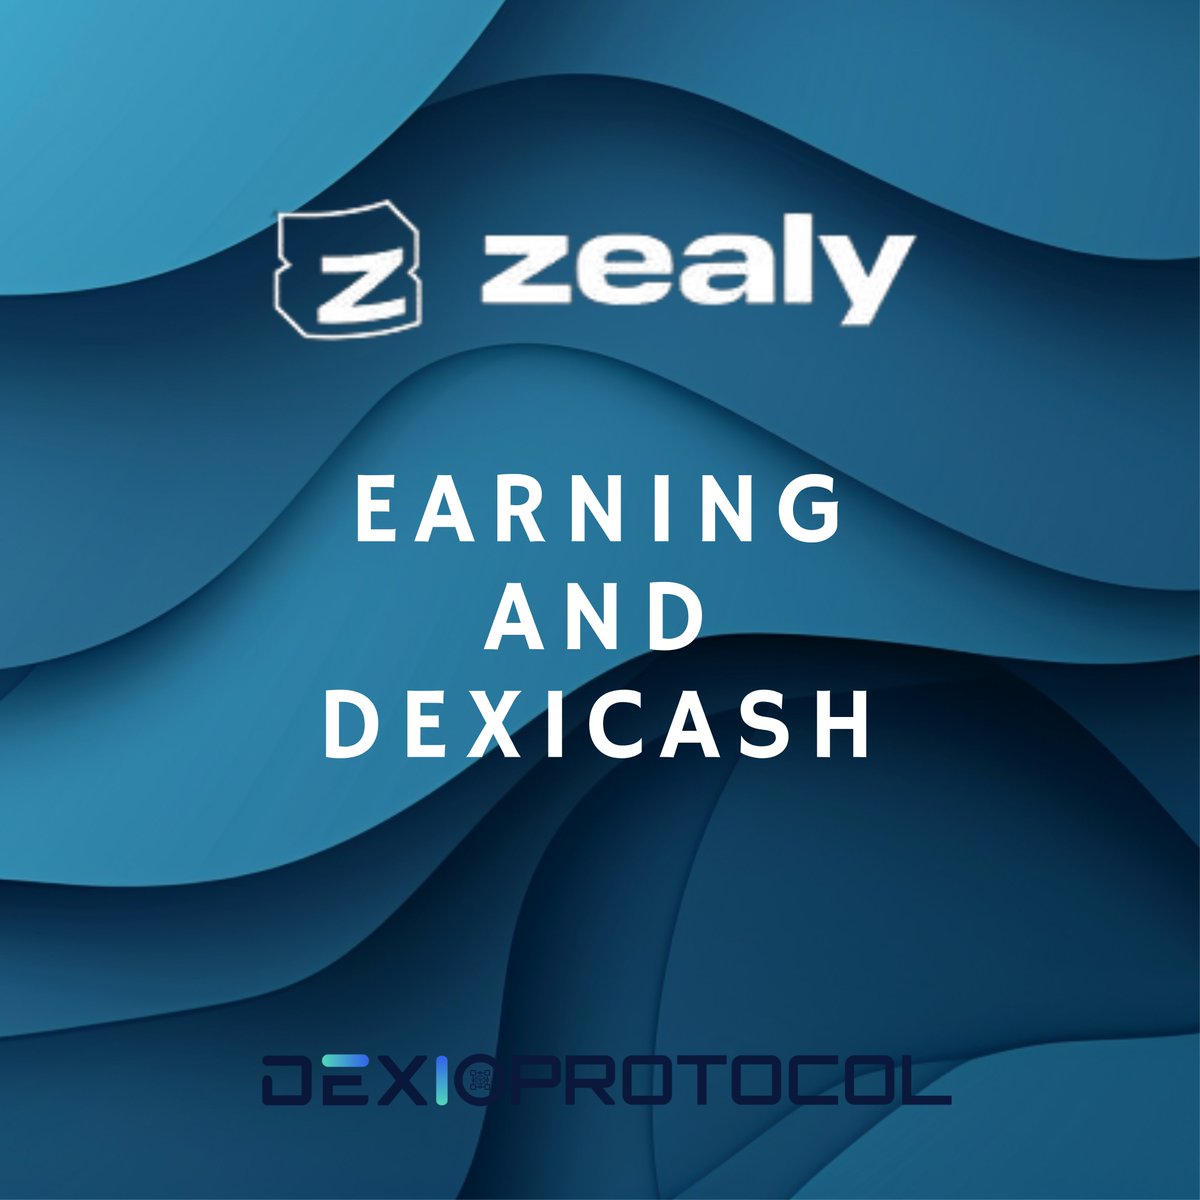 Zealy #4 - Earning and DexiCash Today's episode is about the earning aspect of Zealy and what DexiCash is all about. Zealy has XP Ponint similar to most video games. When you complete quests, you get a fixed amount of XP. The amount of XP you earn determines your place on the